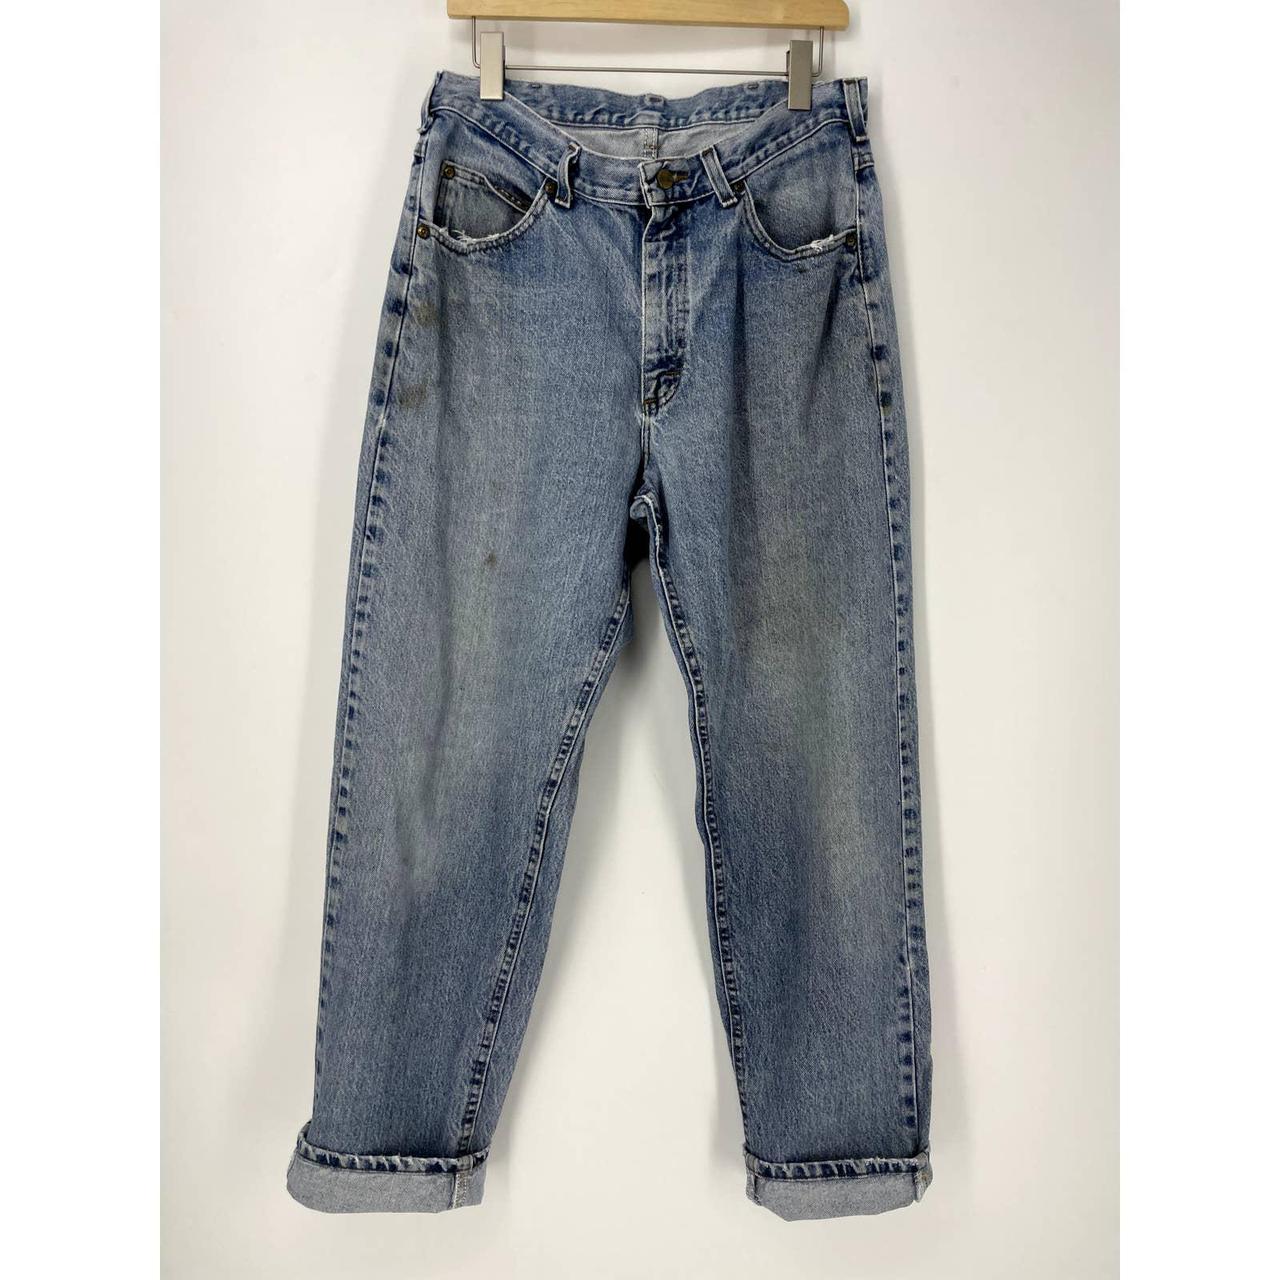 Vintage LL Bean Jeans. Double L Relaxed Fit. The... - Depop